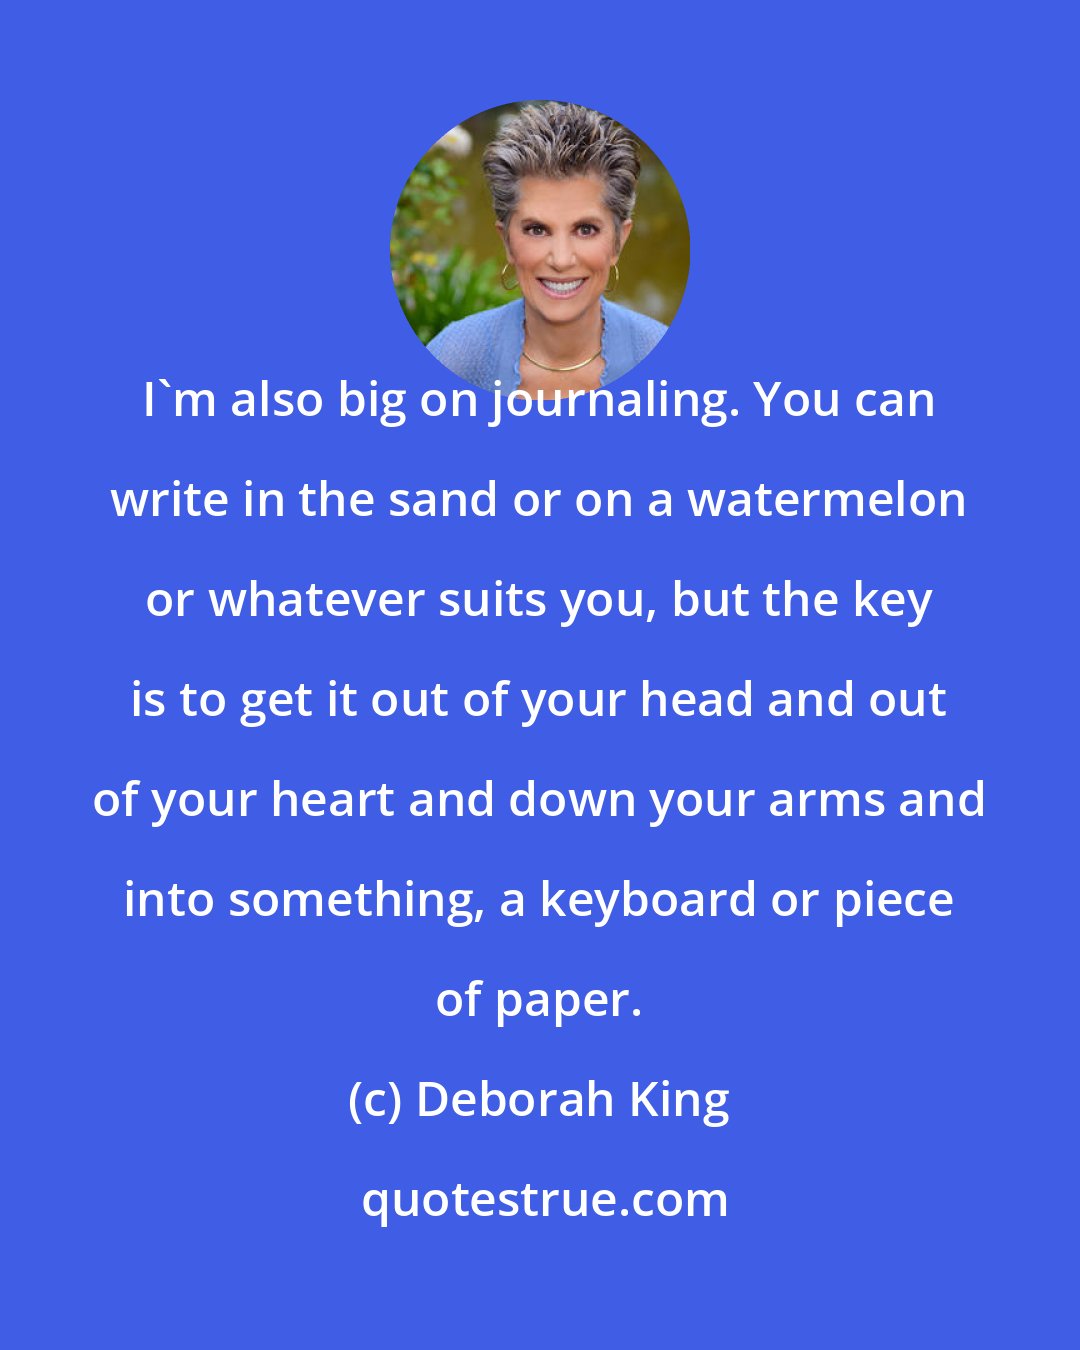 Deborah King: I'm also big on journaling. You can write in the sand or on a watermelon or whatever suits you, but the key is to get it out of your head and out of your heart and down your arms and into something, a keyboard or piece of paper.